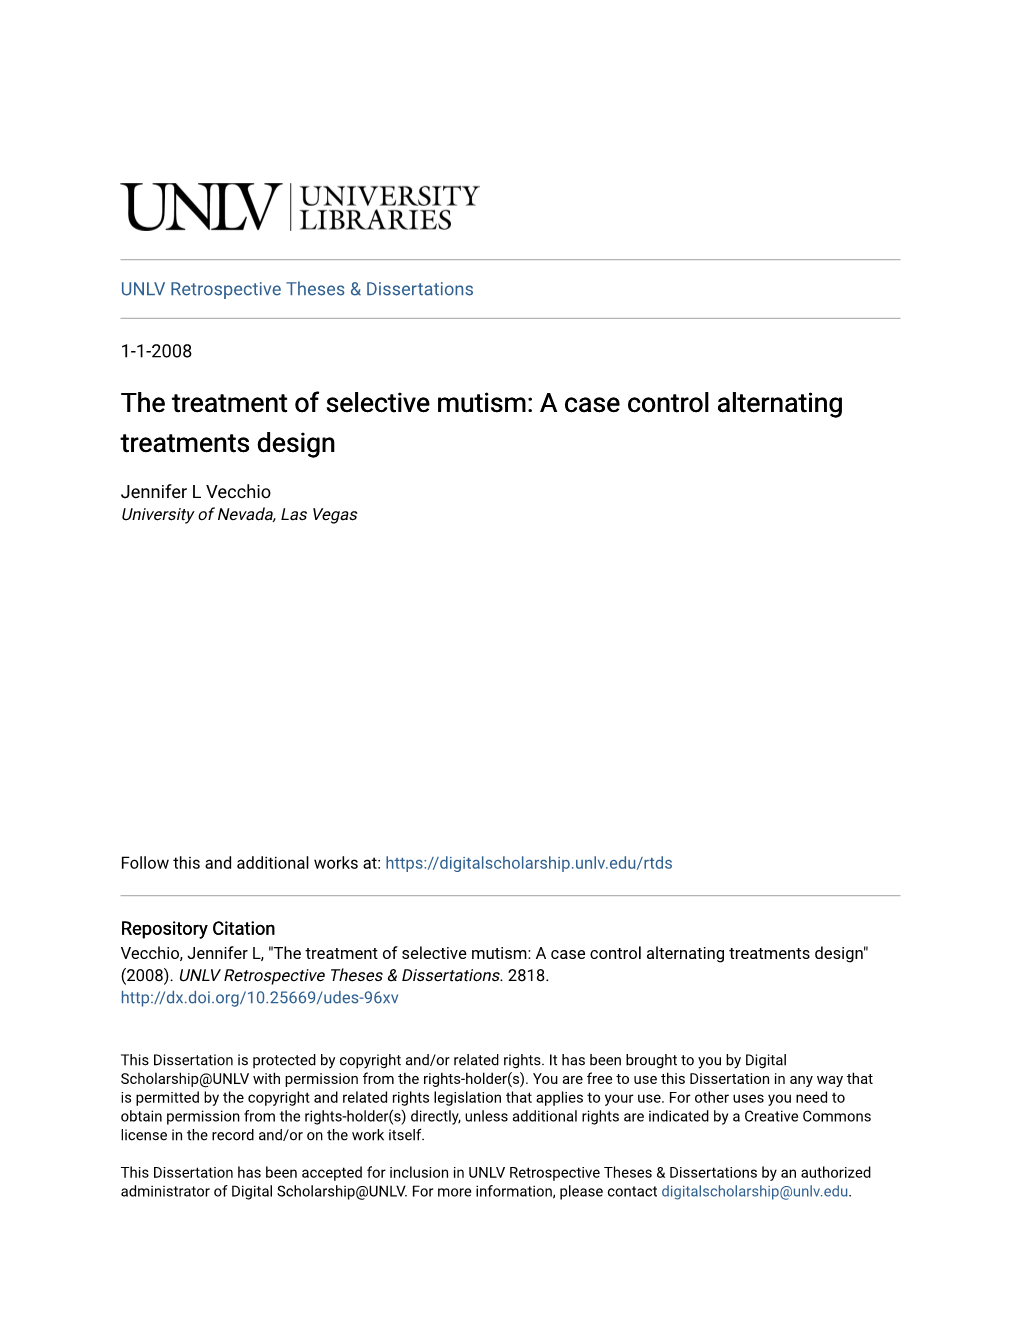 The Treatment of Selective Mutism: a Case Control Alternating Treatments Design